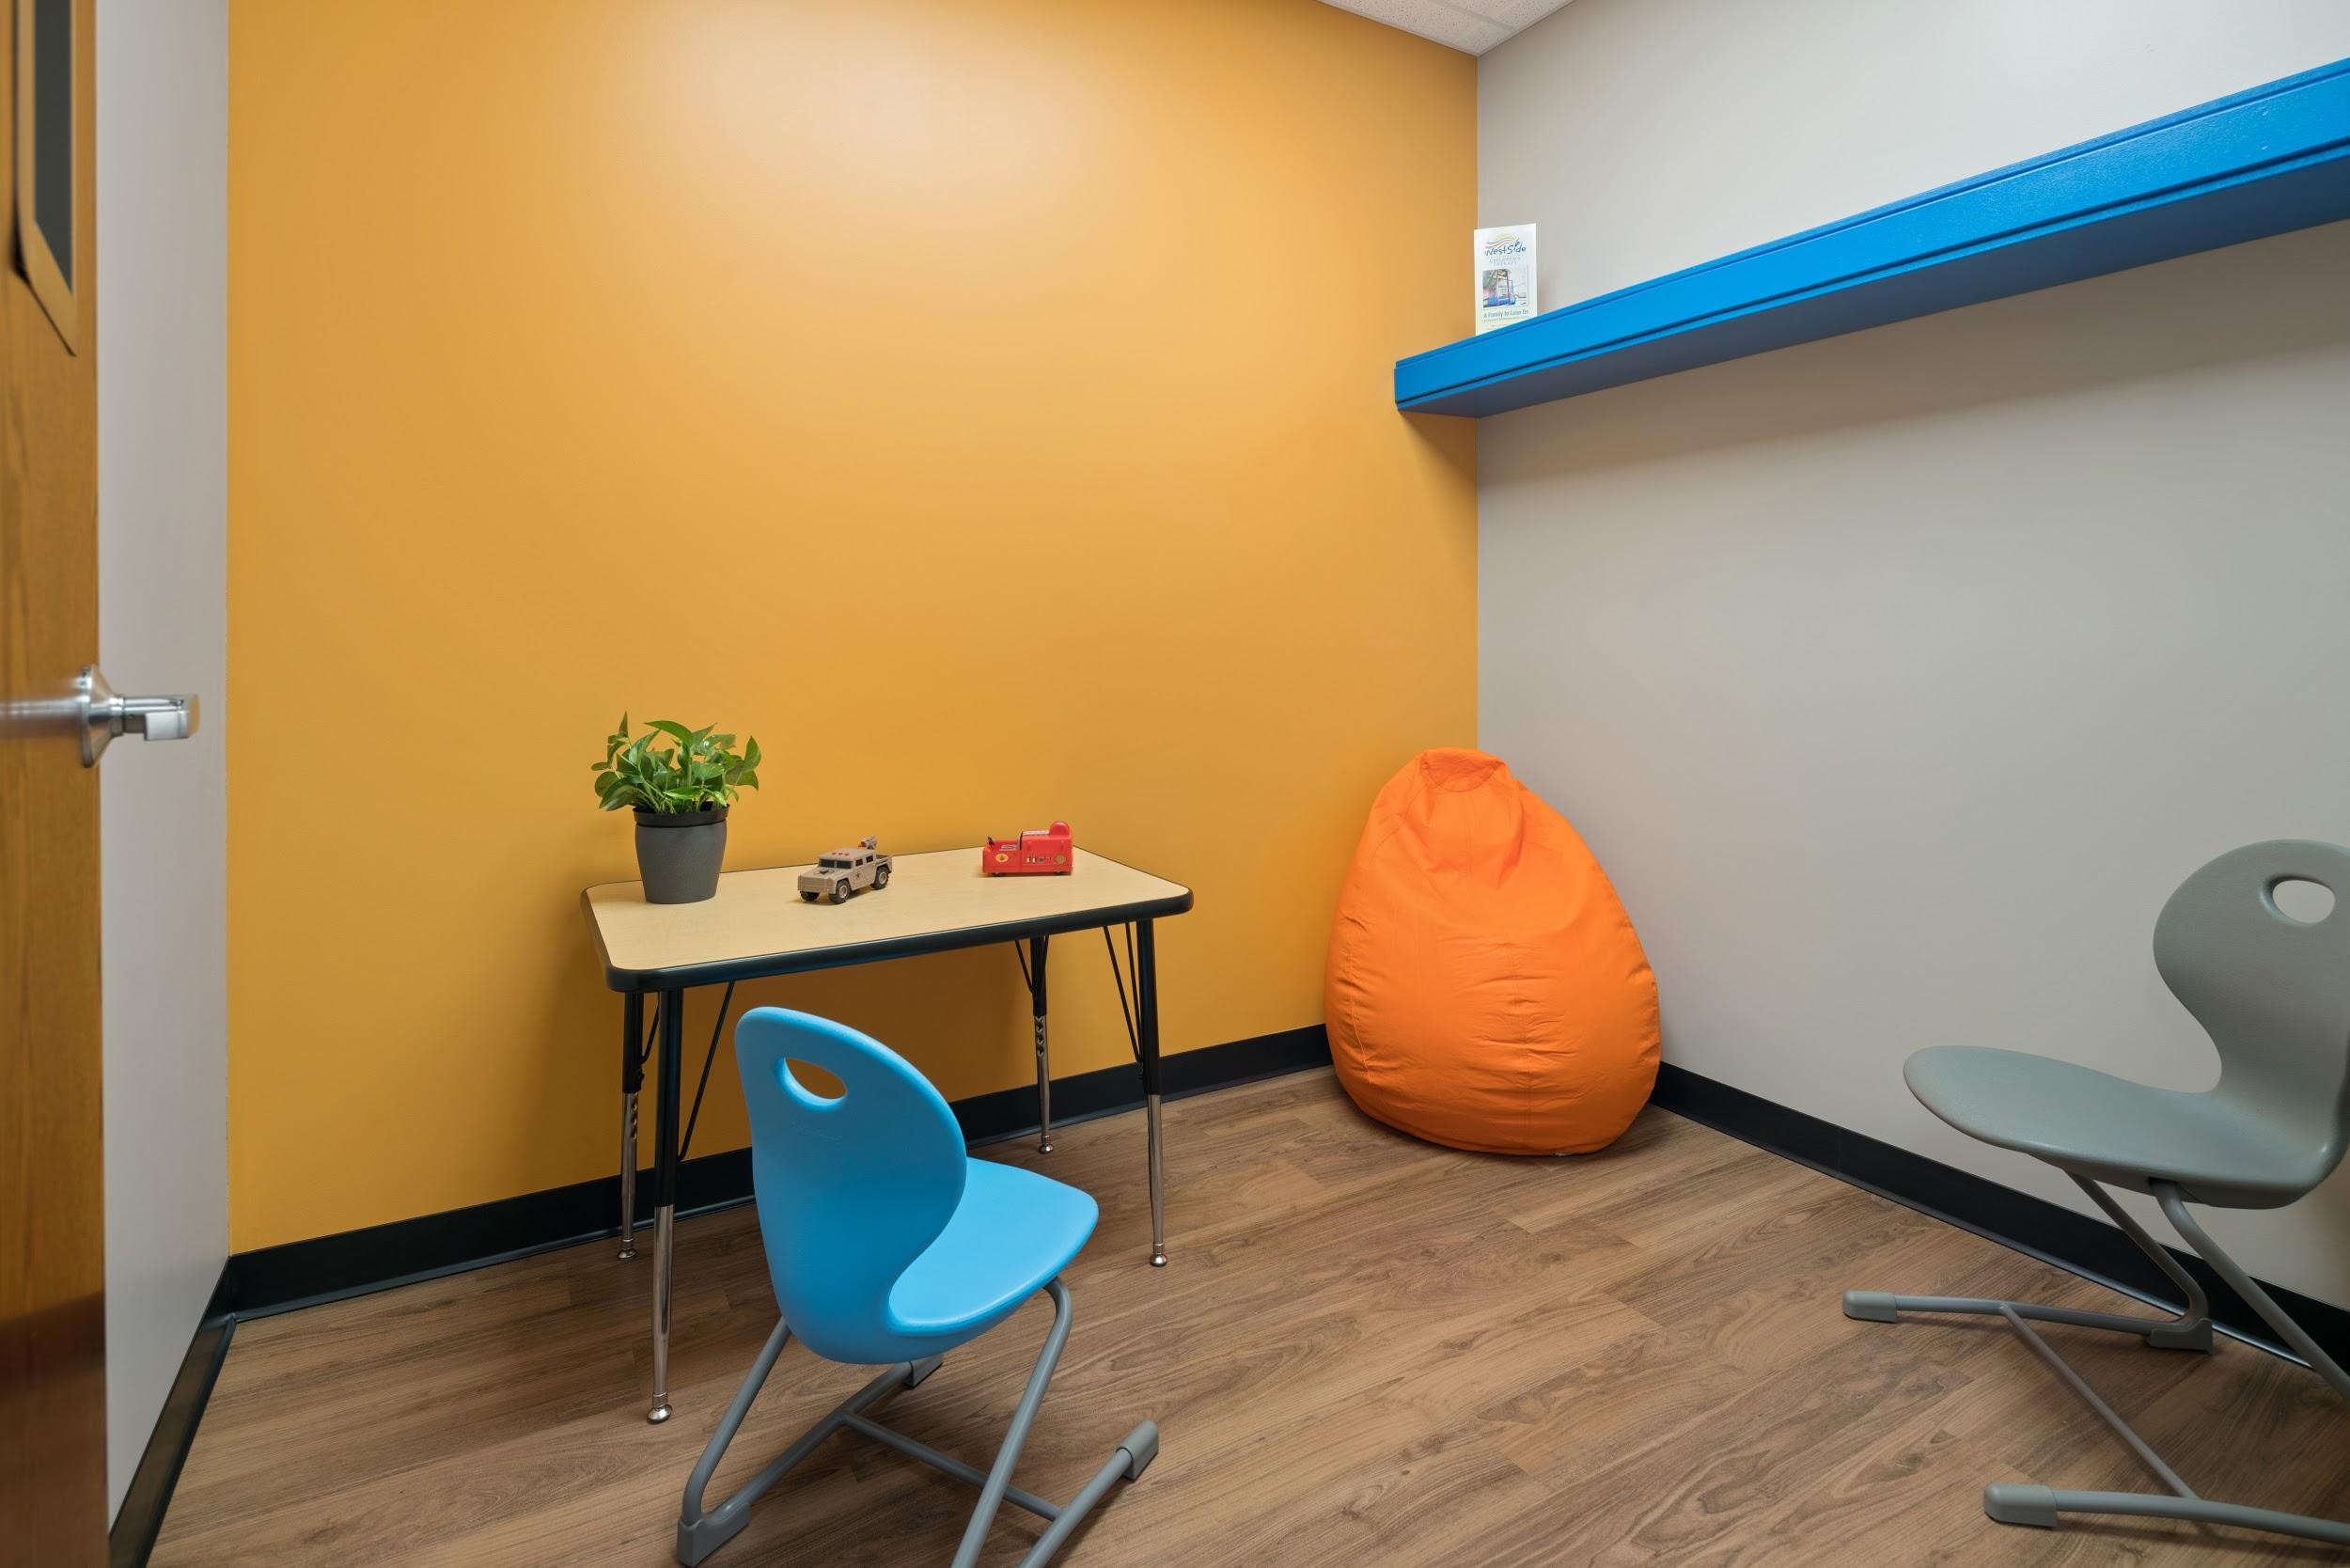 This is a picture of a private room at Westside Children's Therapy